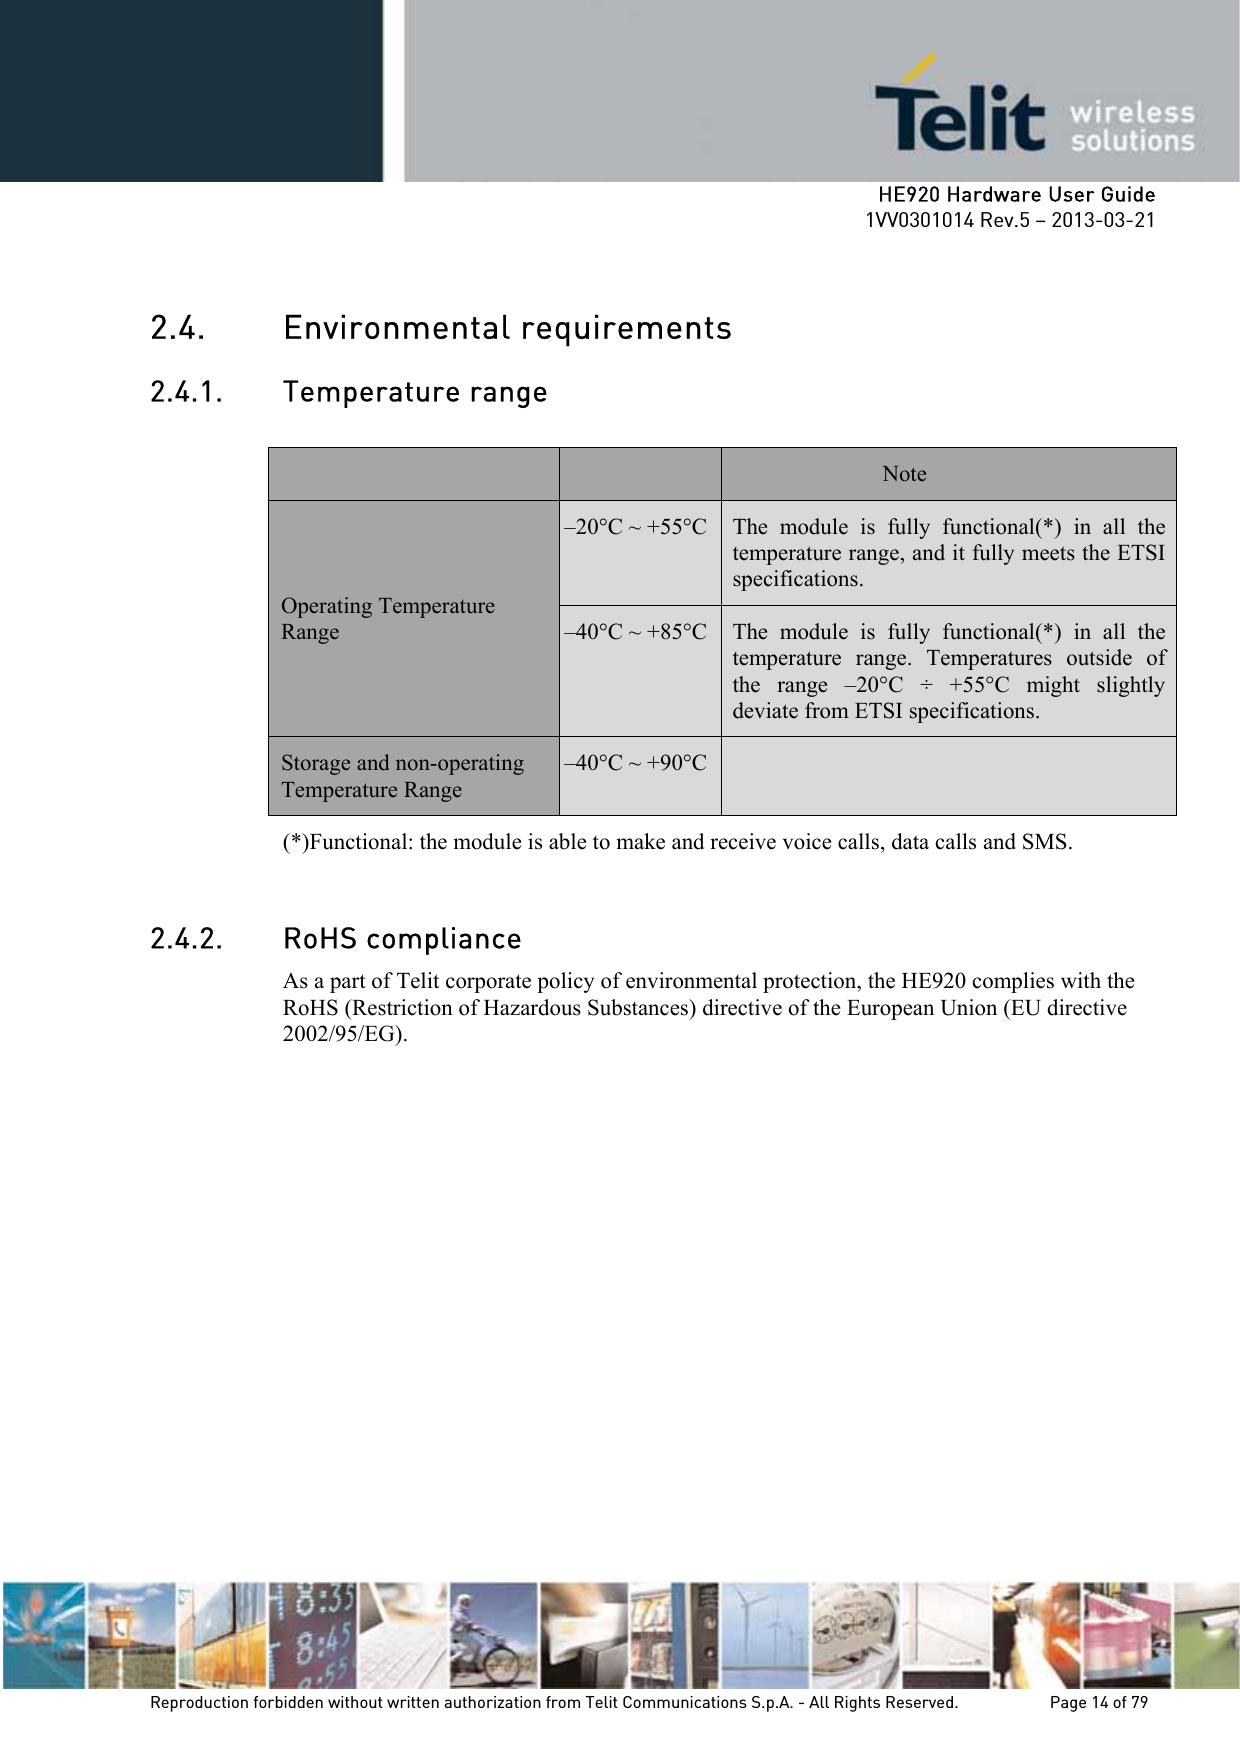     HE920 Hardware User Guide 1VV0301014 Rev.5 – 2013-03-21 Reproduction forbidden without written authorization from Telit Communications S.p.A. - All Rights Reserved.    Page 14 of 79  2.4. Environmental requirements 2.4.1. Temperature range  Note Operating Temperature Range –20°C ~ +55°C The module is fully functional(*) in all the temperature range, and it fully meets the ETSI specifications. –40°C ~ +85°C The module is fully functional(*) in all the temperature range. Temperatures outside of the range –20°C ÷ +55°C might slightly deviate from ETSI specifications. Storage and non-operating Temperature Range –40°C ~ +90°C  (*)Functional: the module is able to make and receive voice calls, data calls and SMS.  2.4.2. RoHS compliance As a part of Telit corporate policy of environmental protection, the HE920 complies with the RoHS (Restriction of Hazardous Substances) directive of the European Union (EU directive 2002/95/EG). 